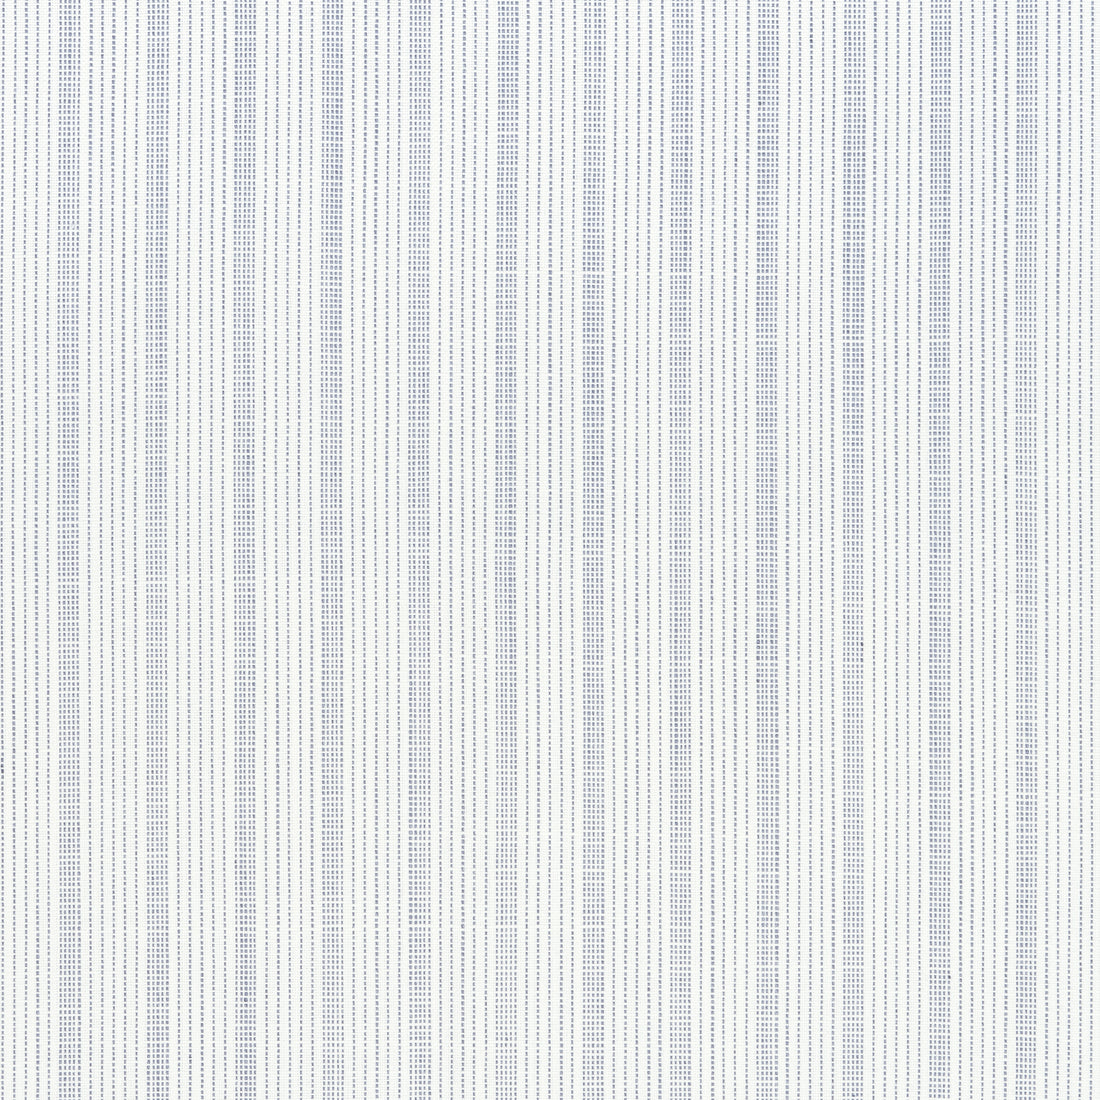 Ebro Stripe fabric in sky color - pattern number W8513 - by Thibaut in the Villa collection